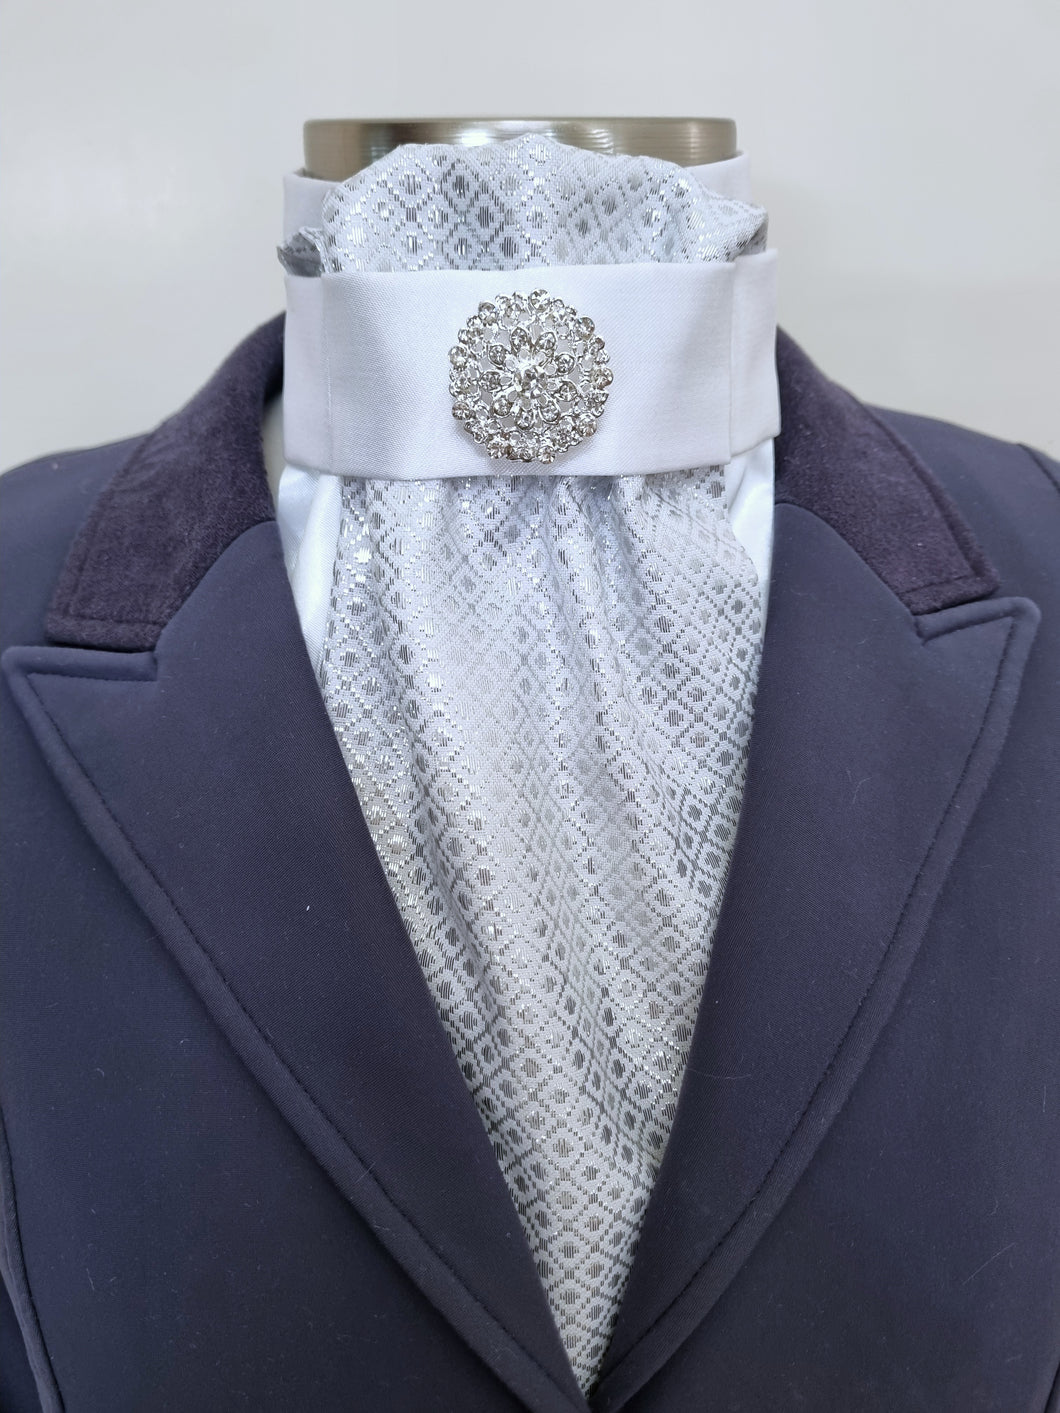 ERA EURO LYNDAL Stock Tie - White satin and silver brocade with brooch